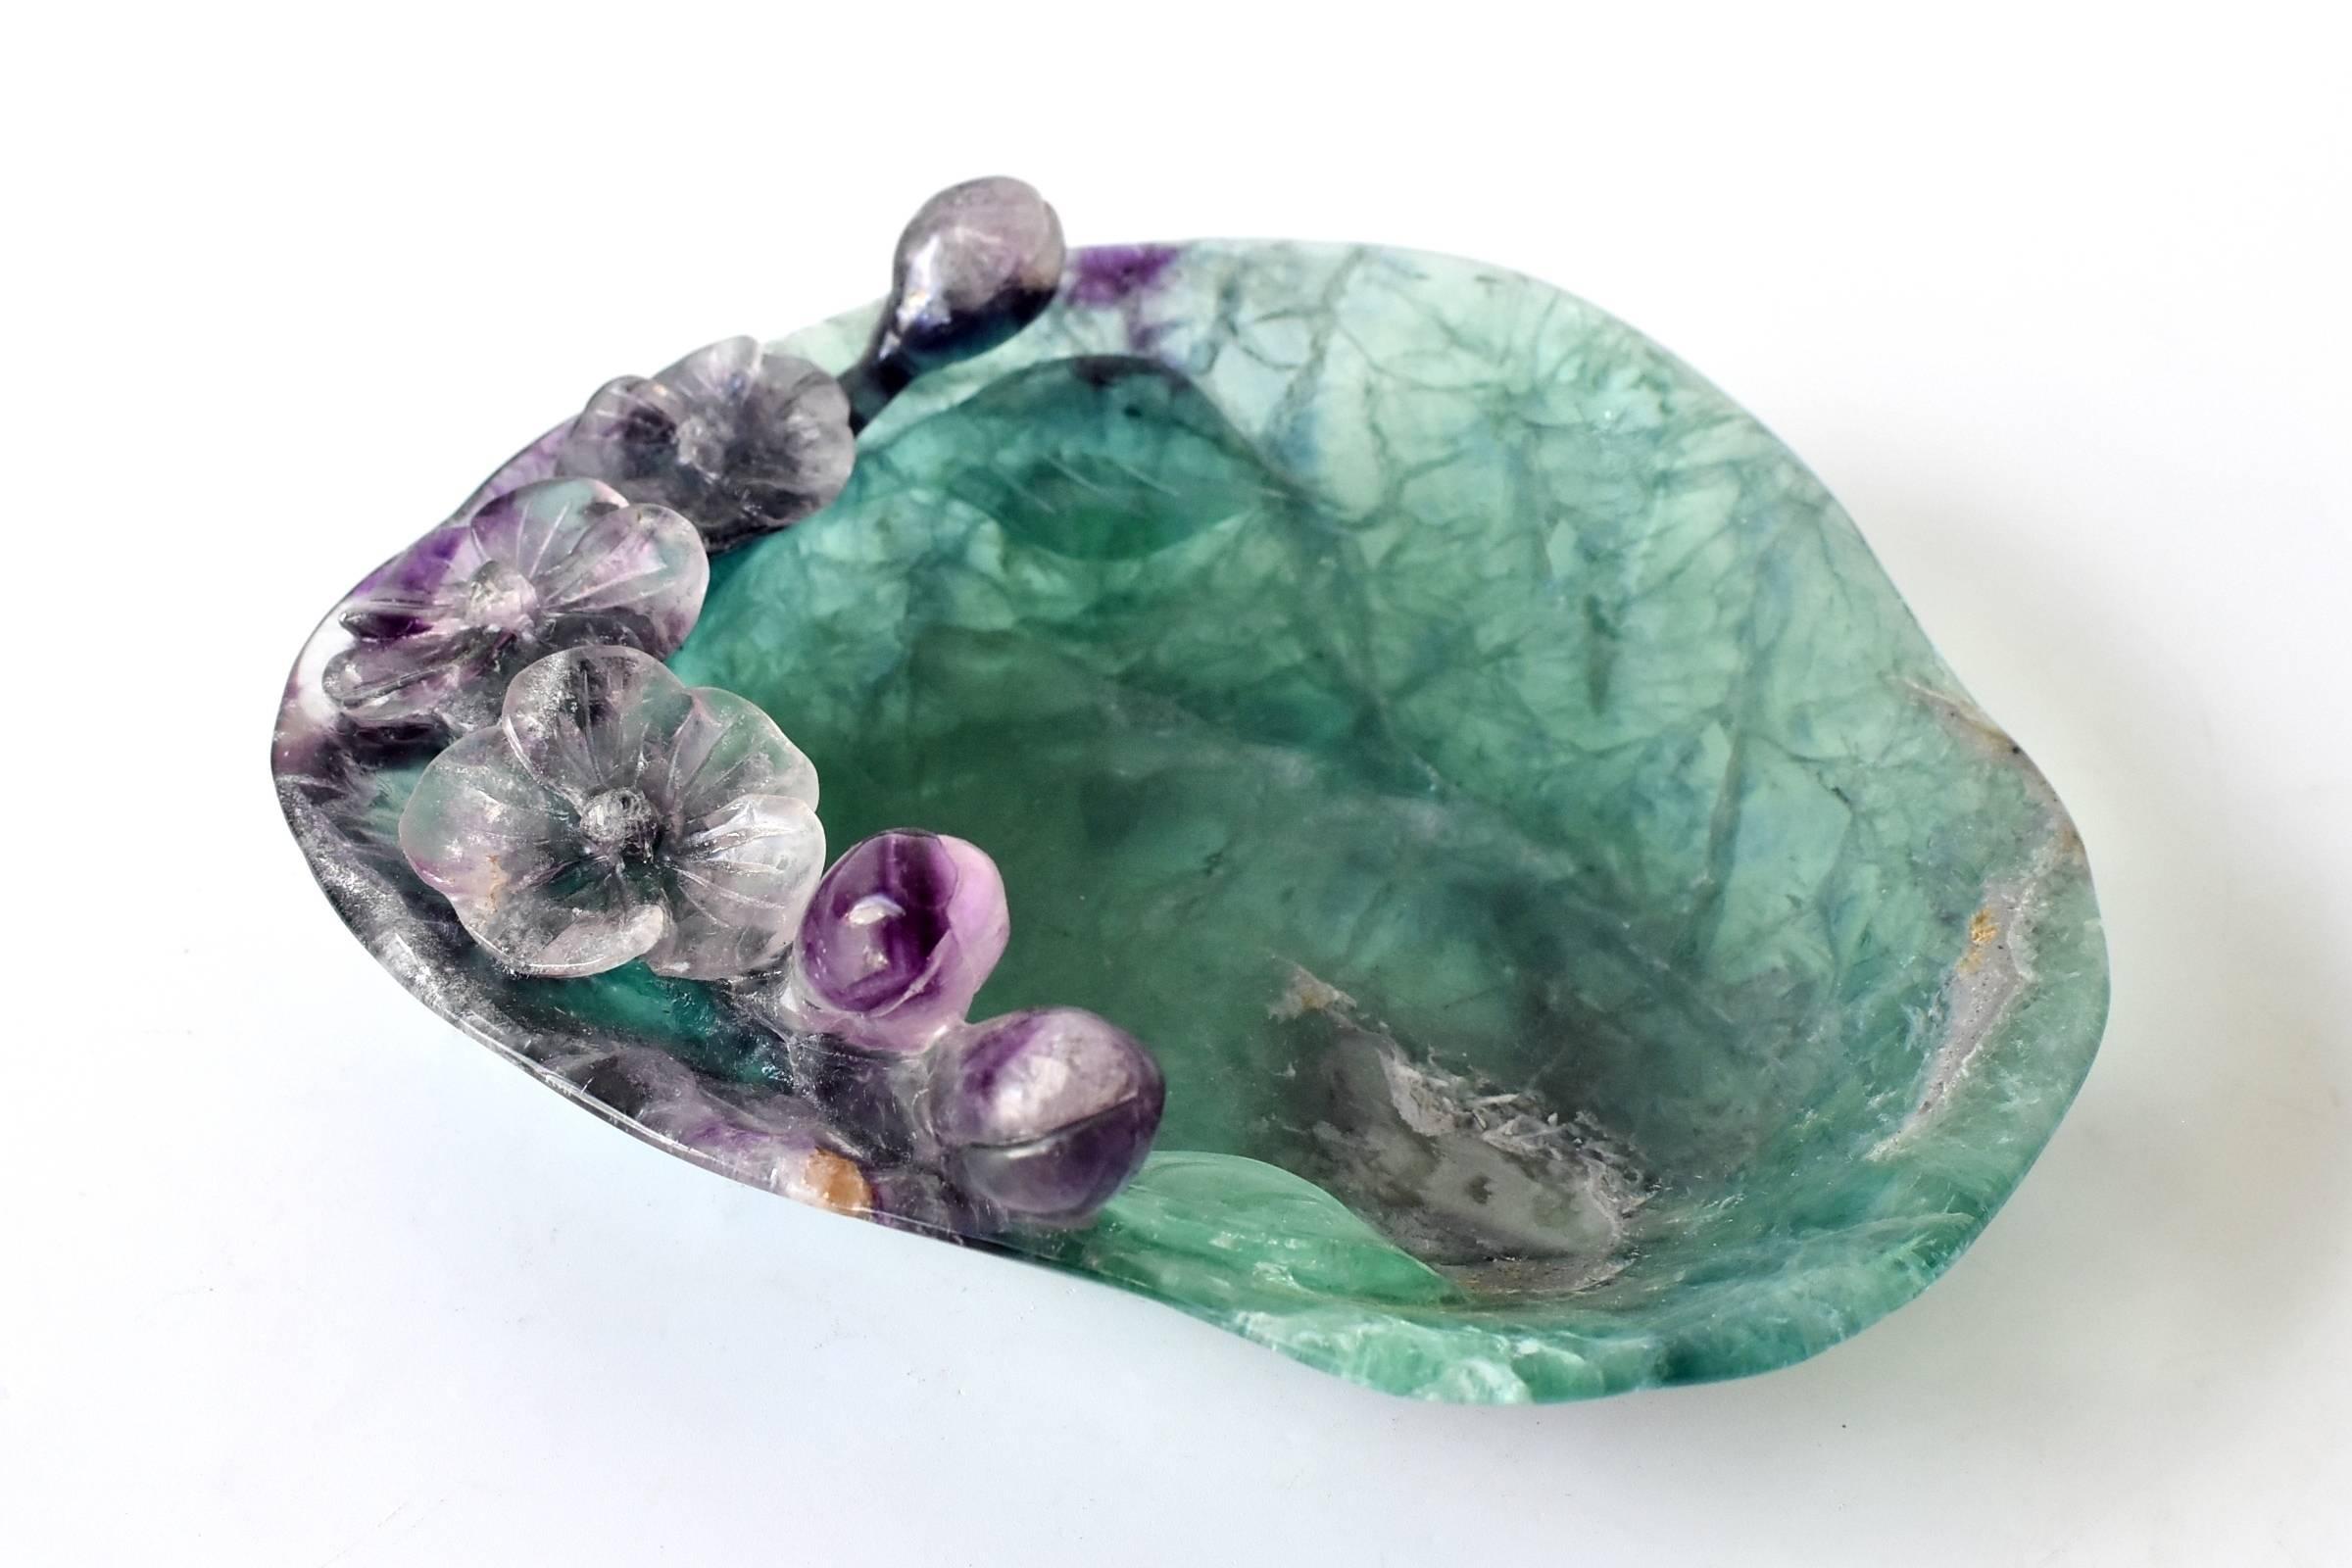 This one of a kind violet Fluorite dish is stunning. One of the most collectible and highly sought after crystals in the world, treasured by mineralogists and metaphysical healers, Fluorite is an extraordinary creation of nature. Luminous and